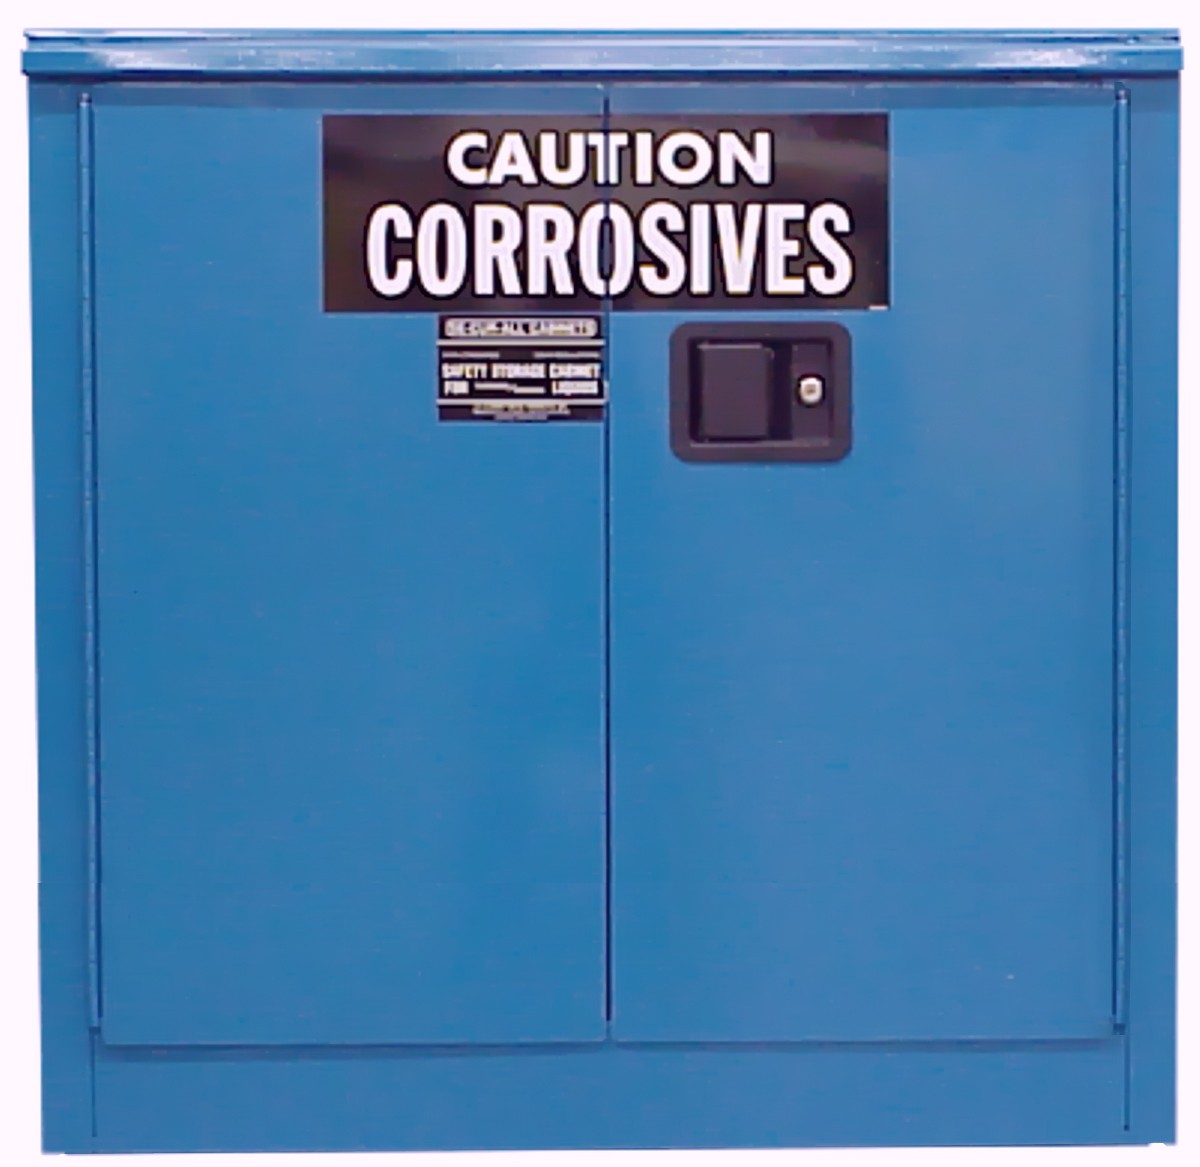 Cabinets for Storing Acids, Corrosives, and Lab Supplies